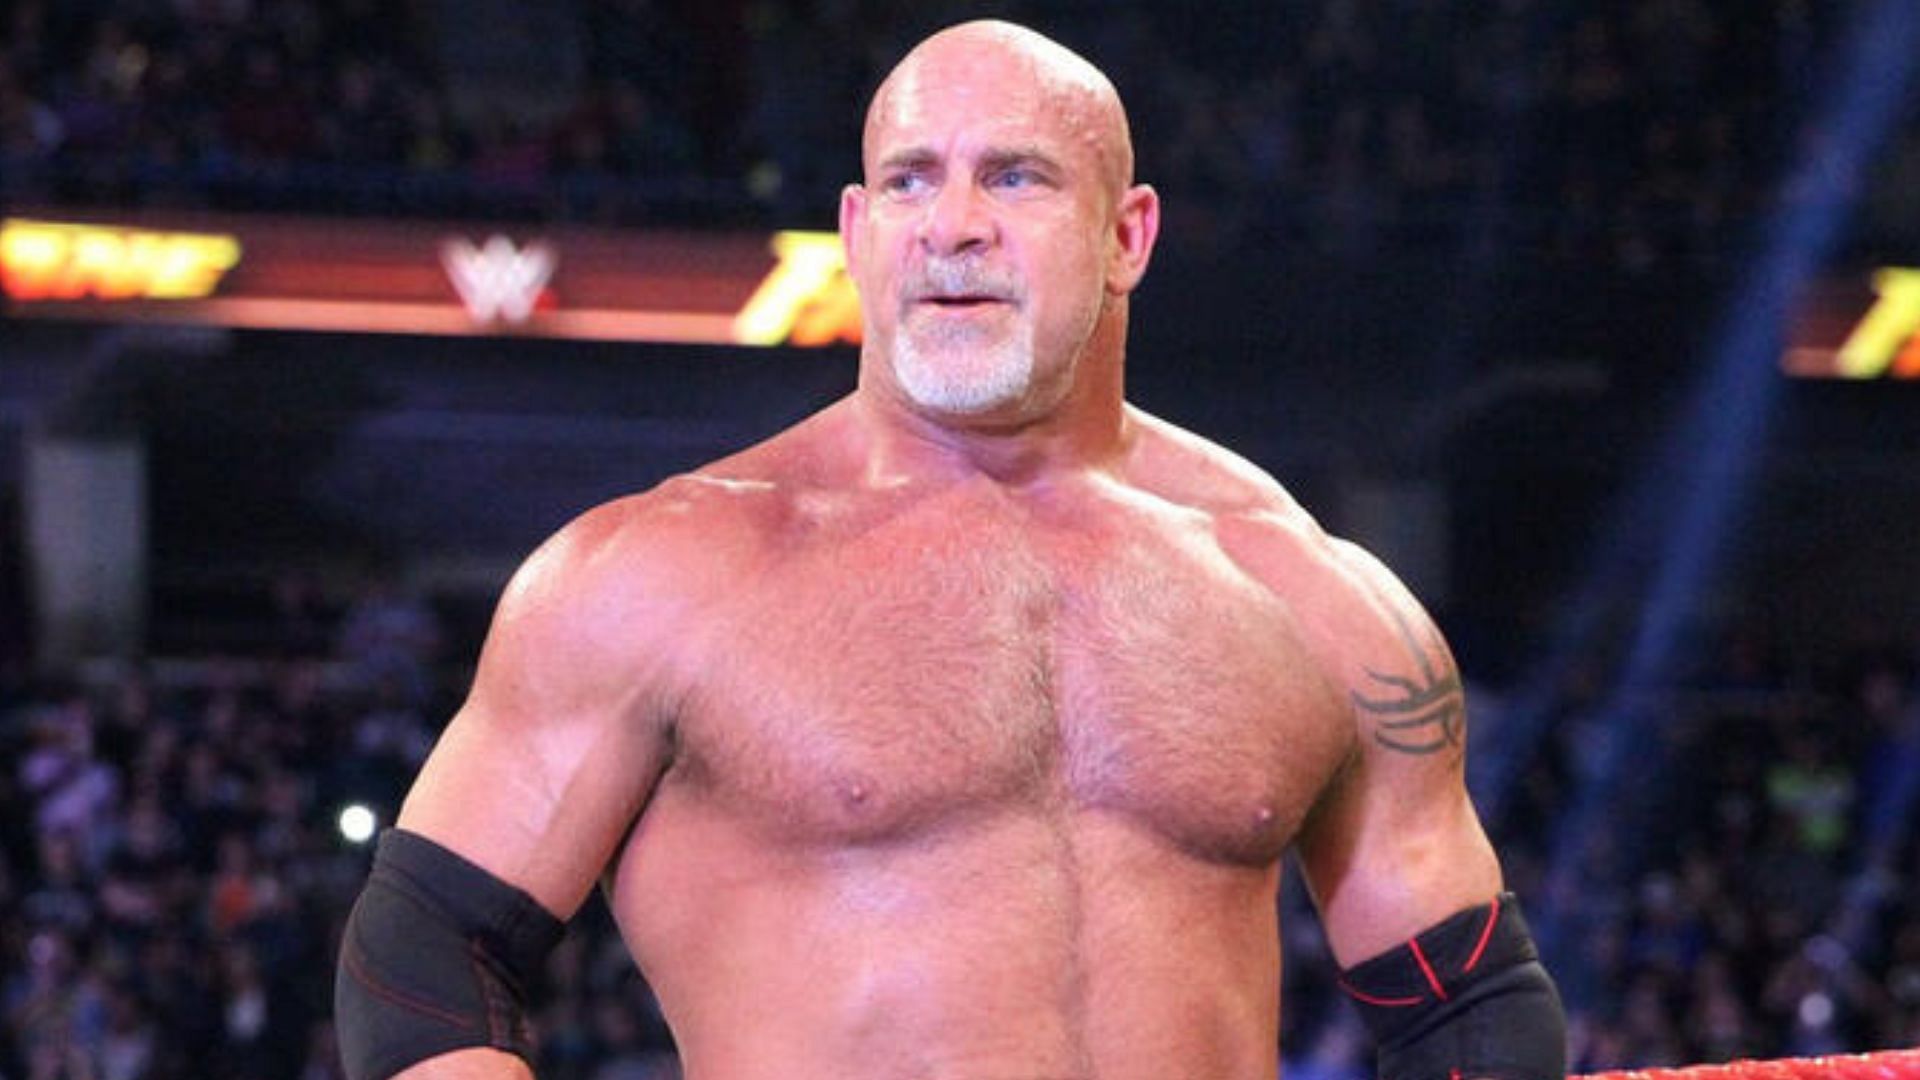 Goldberg is a three-time world champion and Hall of Famer in WWE.